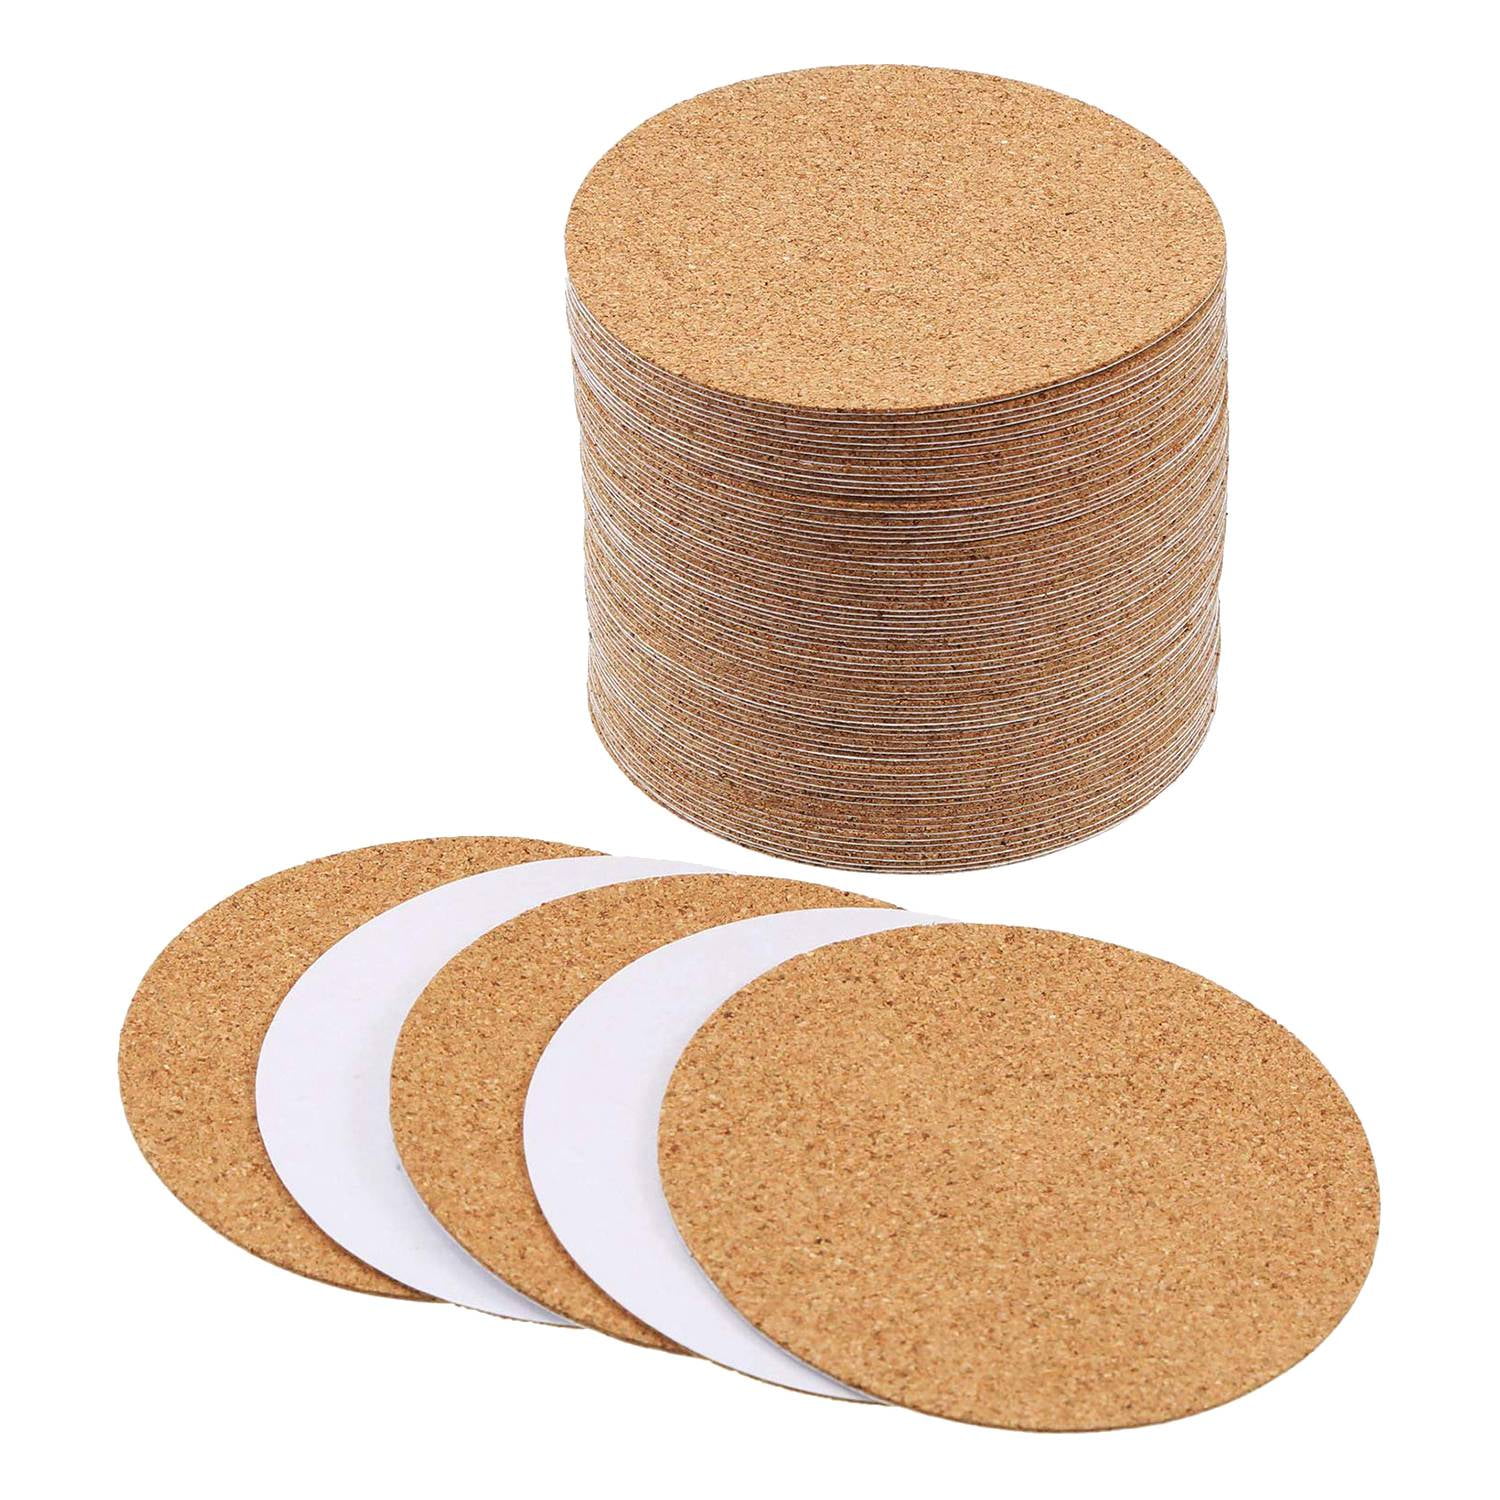 75 Adhesive Backed Cork for Coasters A Ceramic Tile/Stone 3.75 x 3.75 